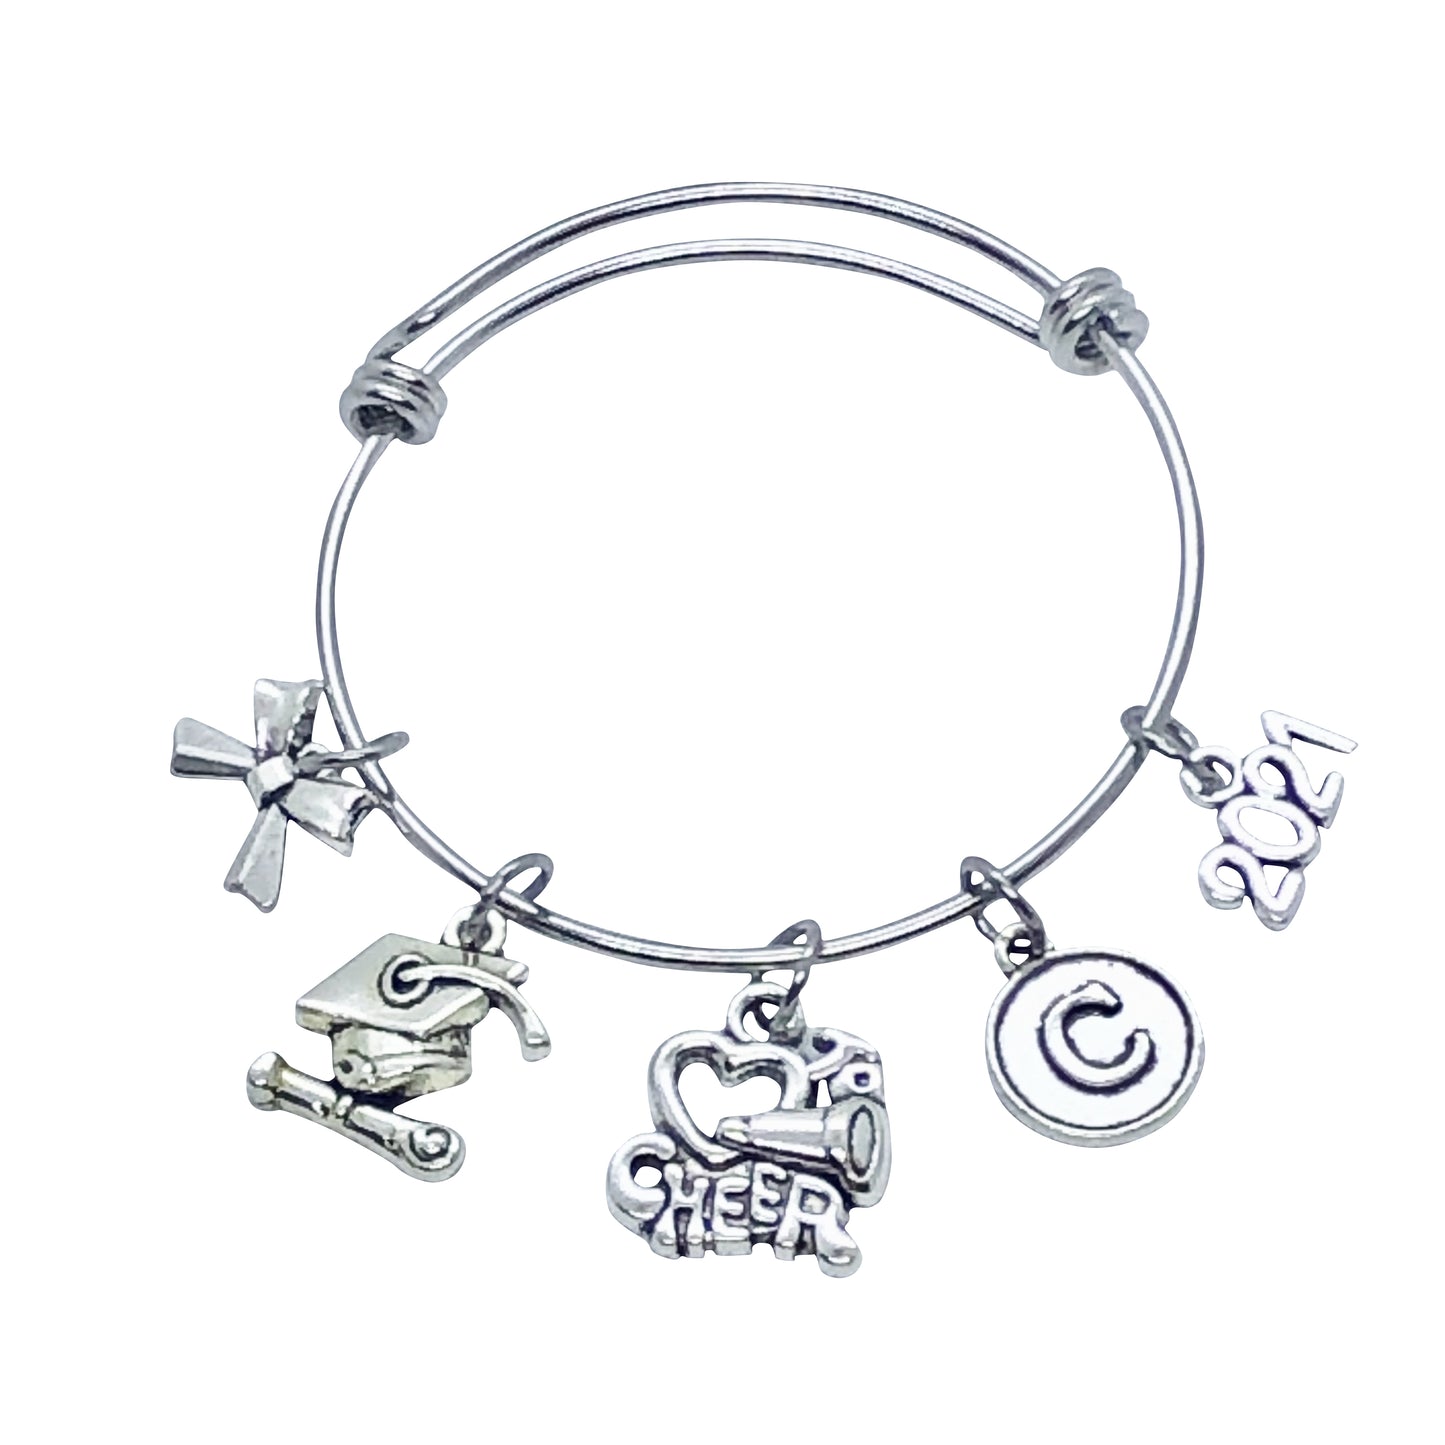 Load image into Gallery viewer, 2021 Cheerleading Graduate Bangle Charm Bracelet - Cheer and Dance On Demand
